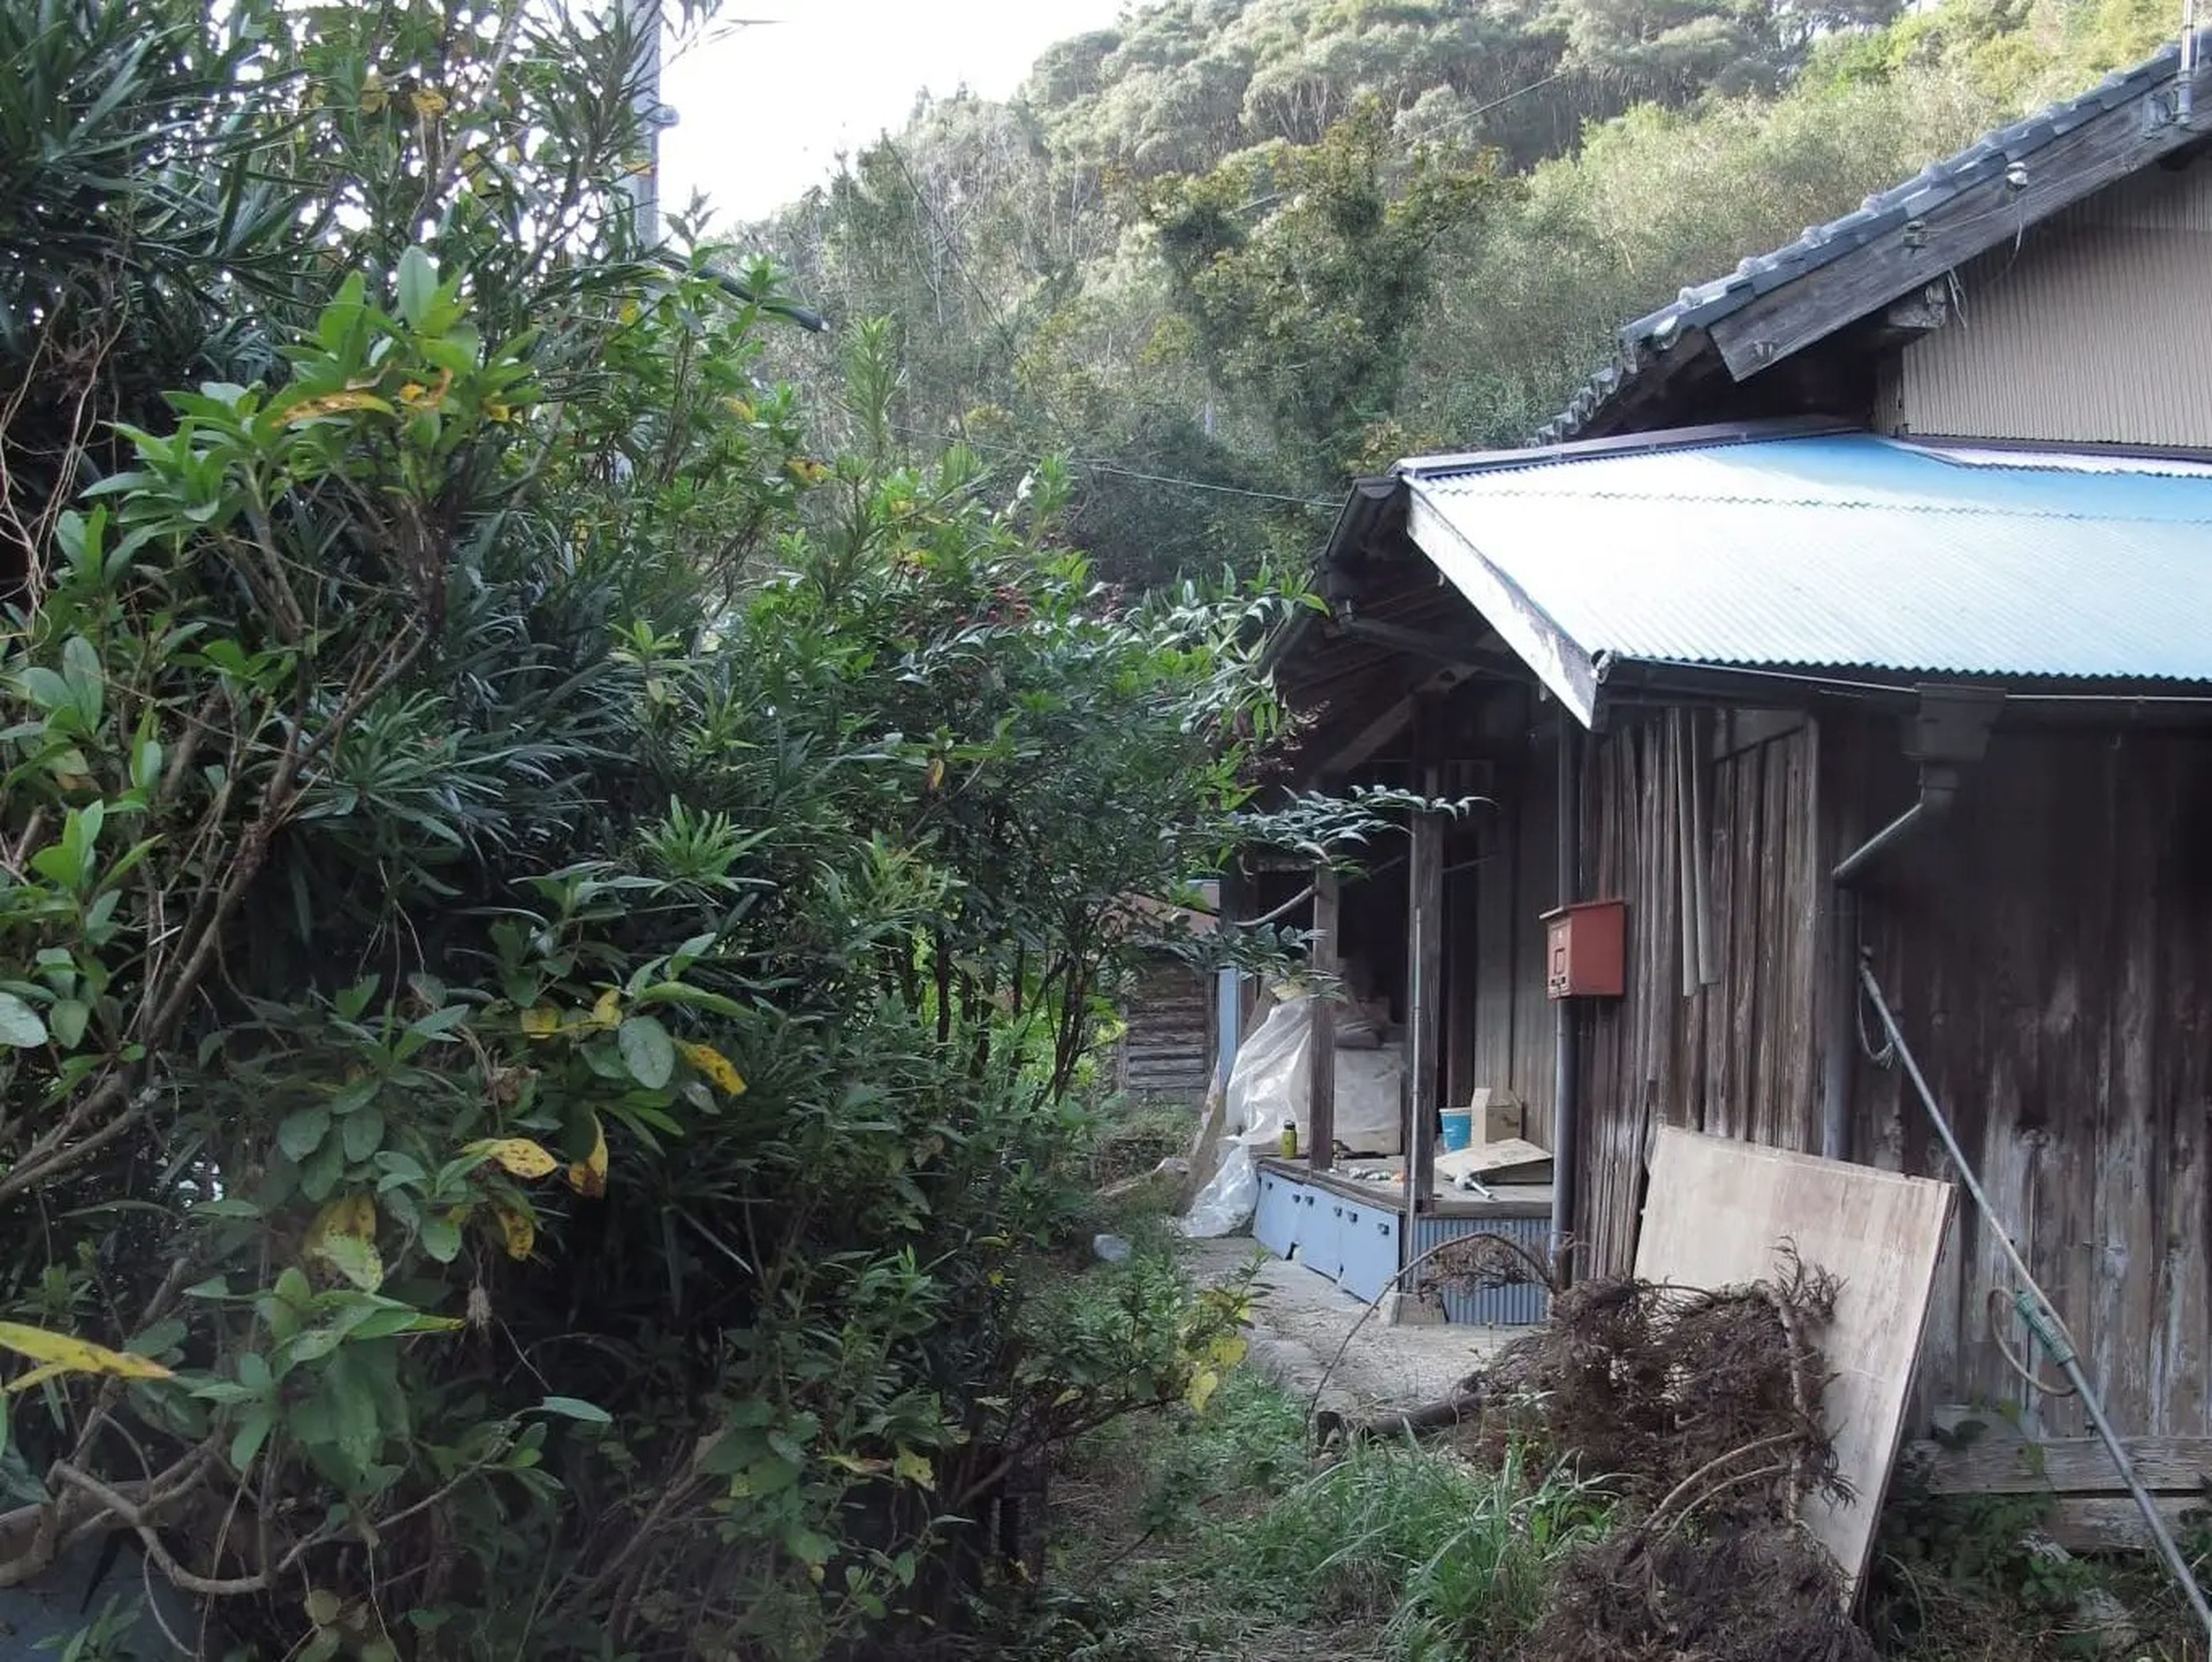 The exterior of the Ryokan and a densely-overgrown yard.